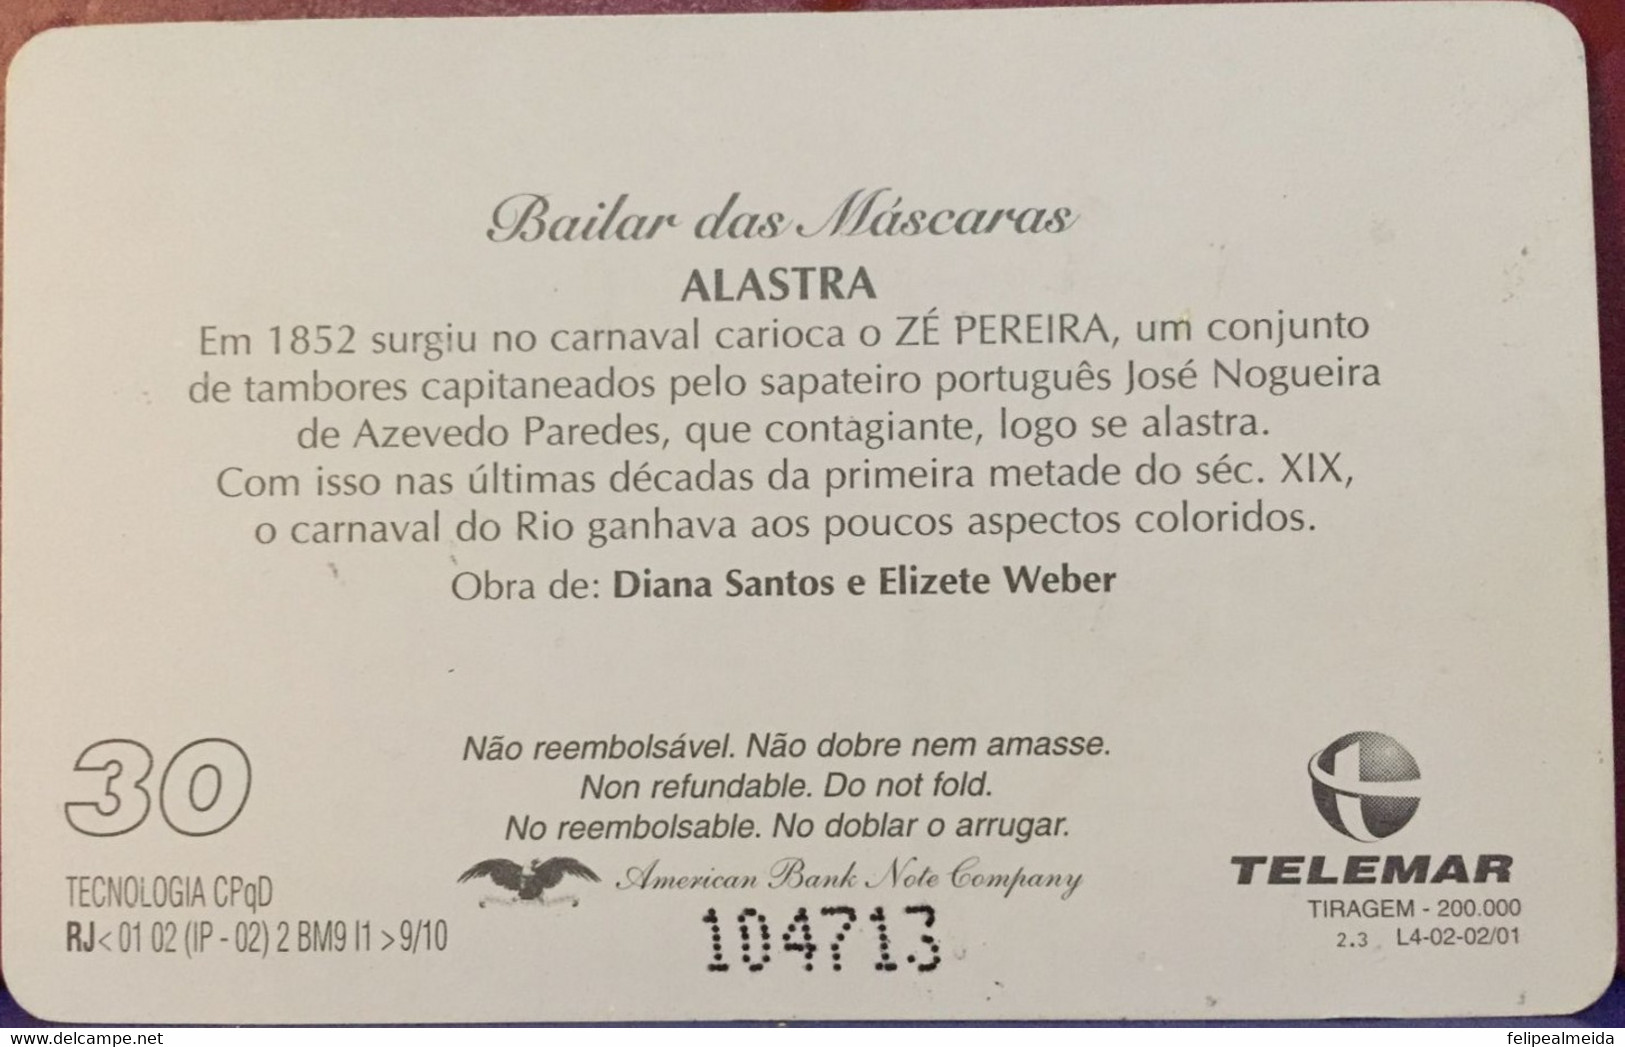 Phone Card Manufactured By Telemar In 2001 - Bailar Das Mascaras - Alastra - Cultural